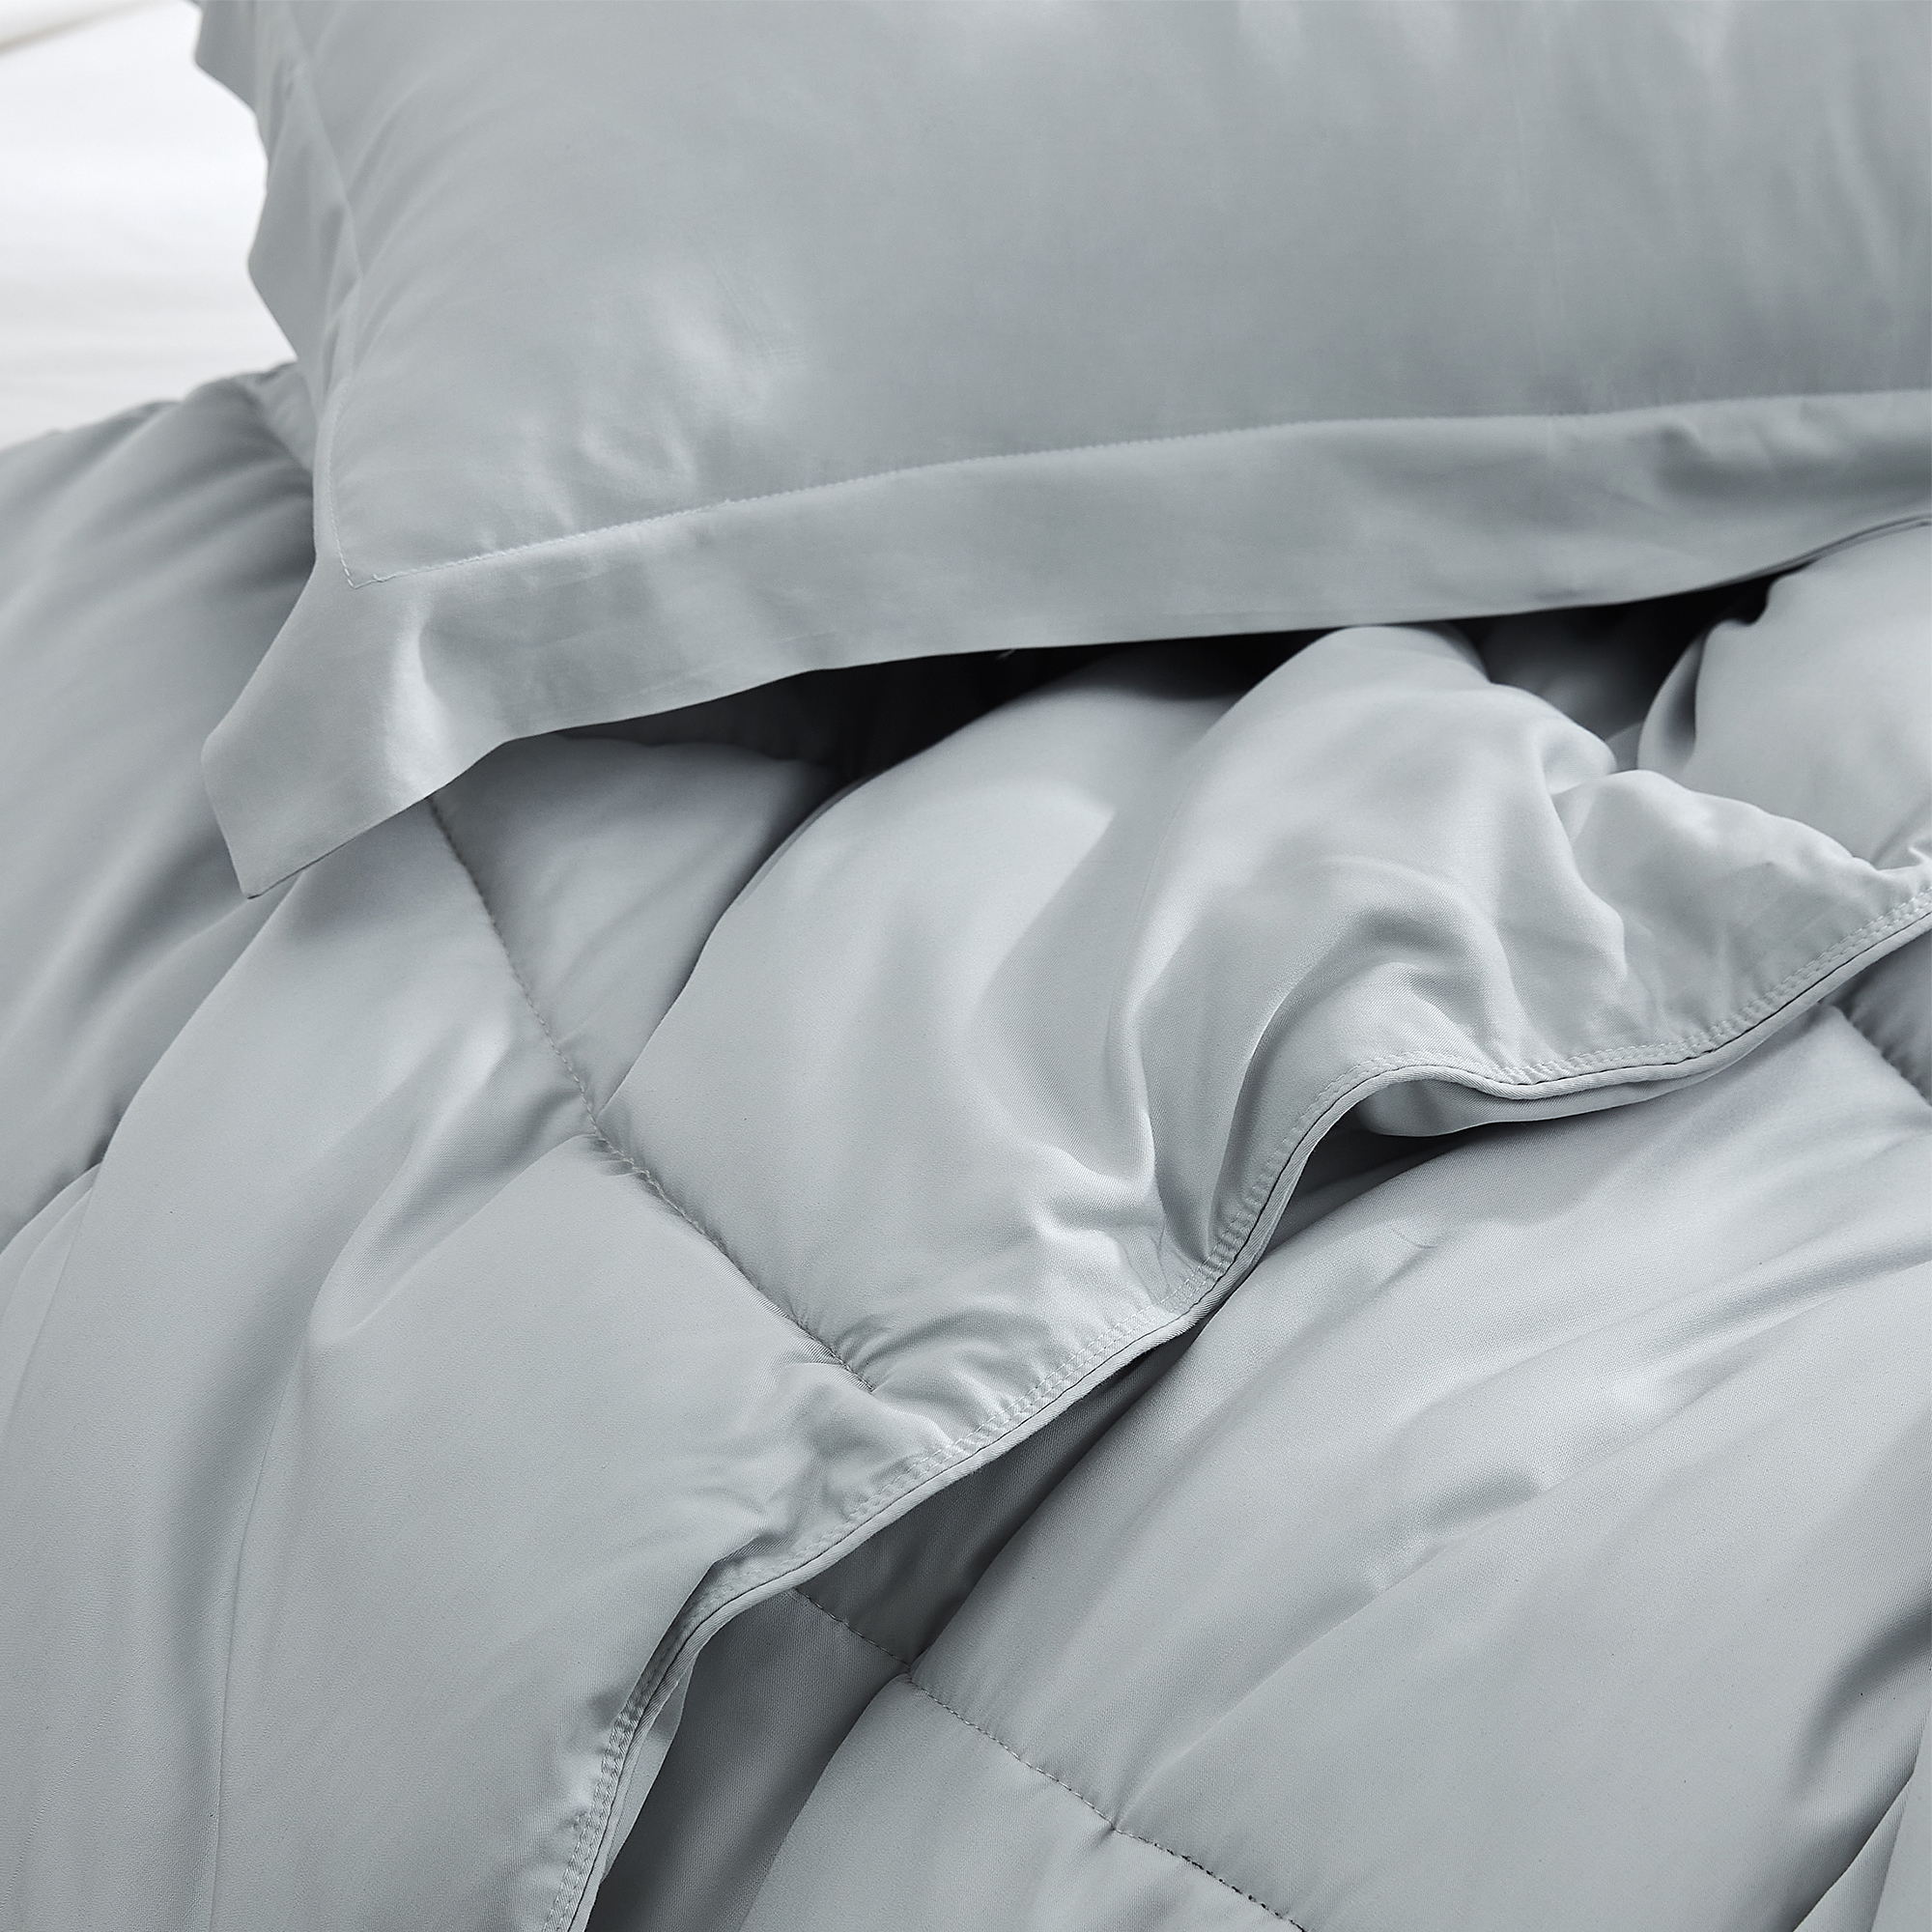 Snorze® Cloud Comforter - Coma Inducer® Ultra Cozy Bamboo - Oversized Comforter in Glacier Gray